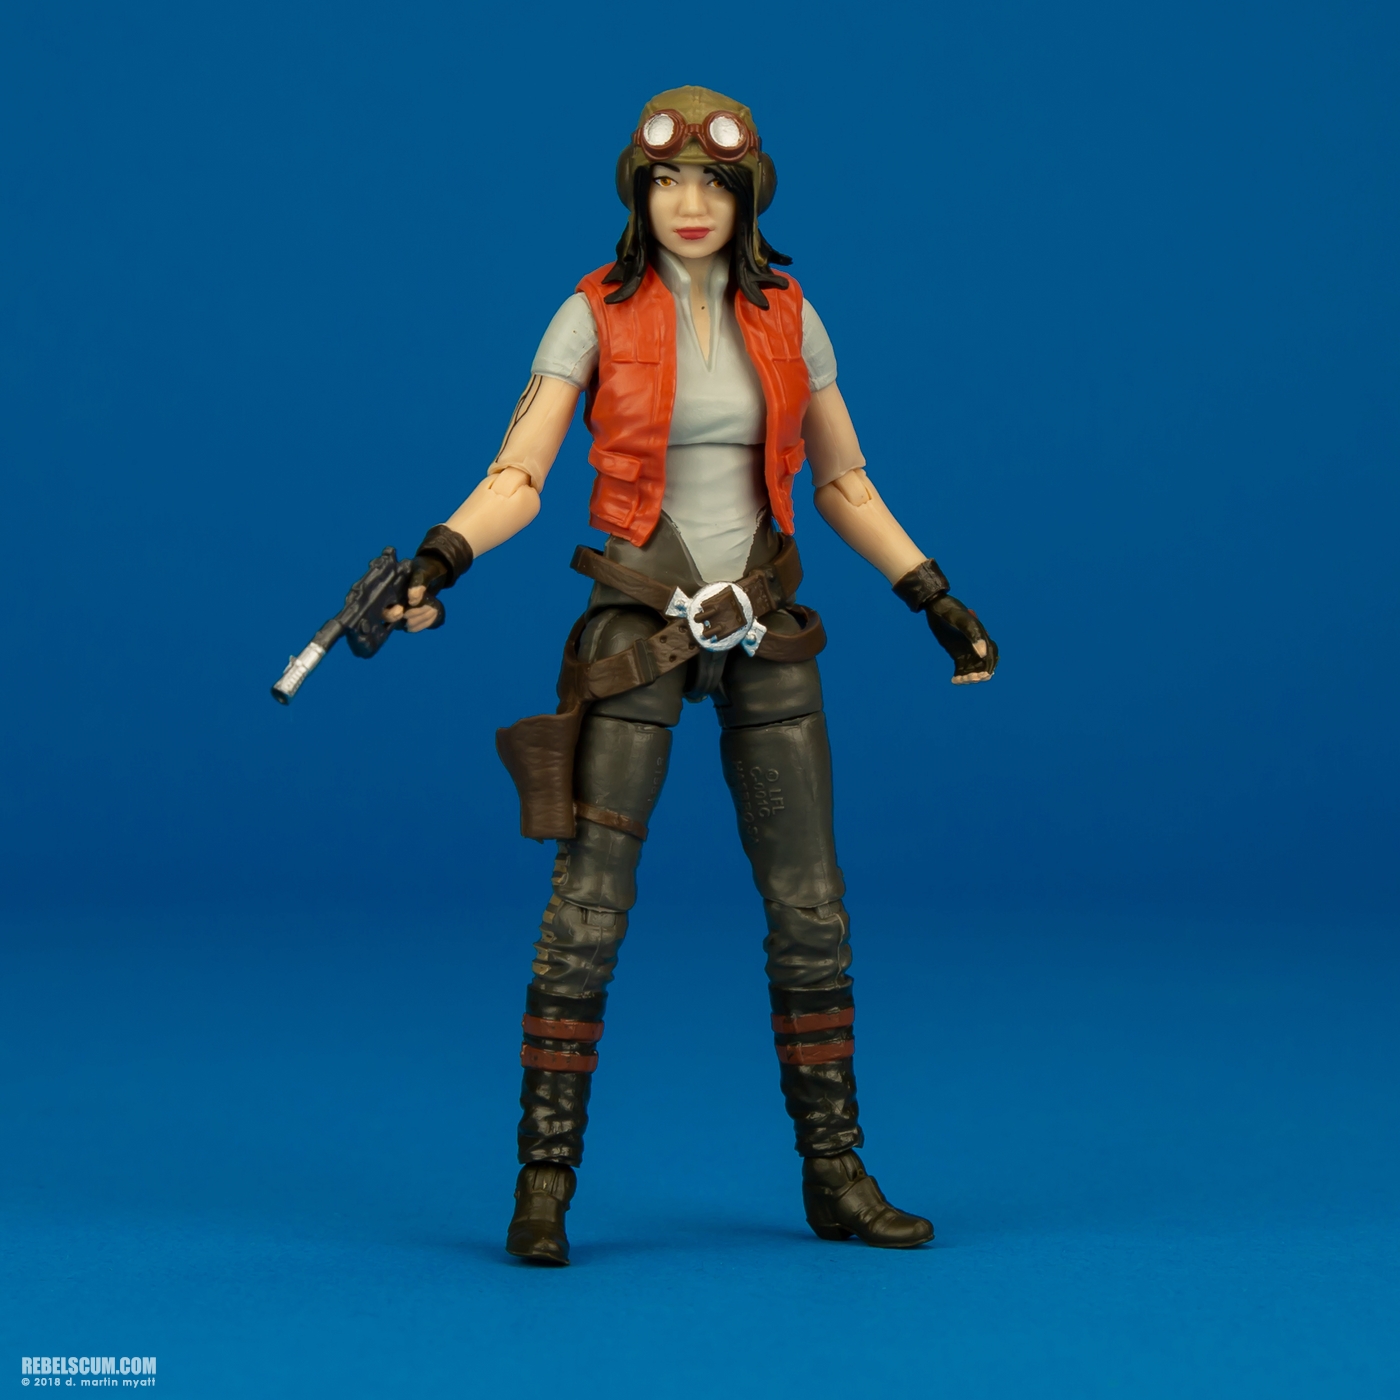 VC129-Doctor-Aphra-The-Vintage-Collection-Hasbro-012.jpg